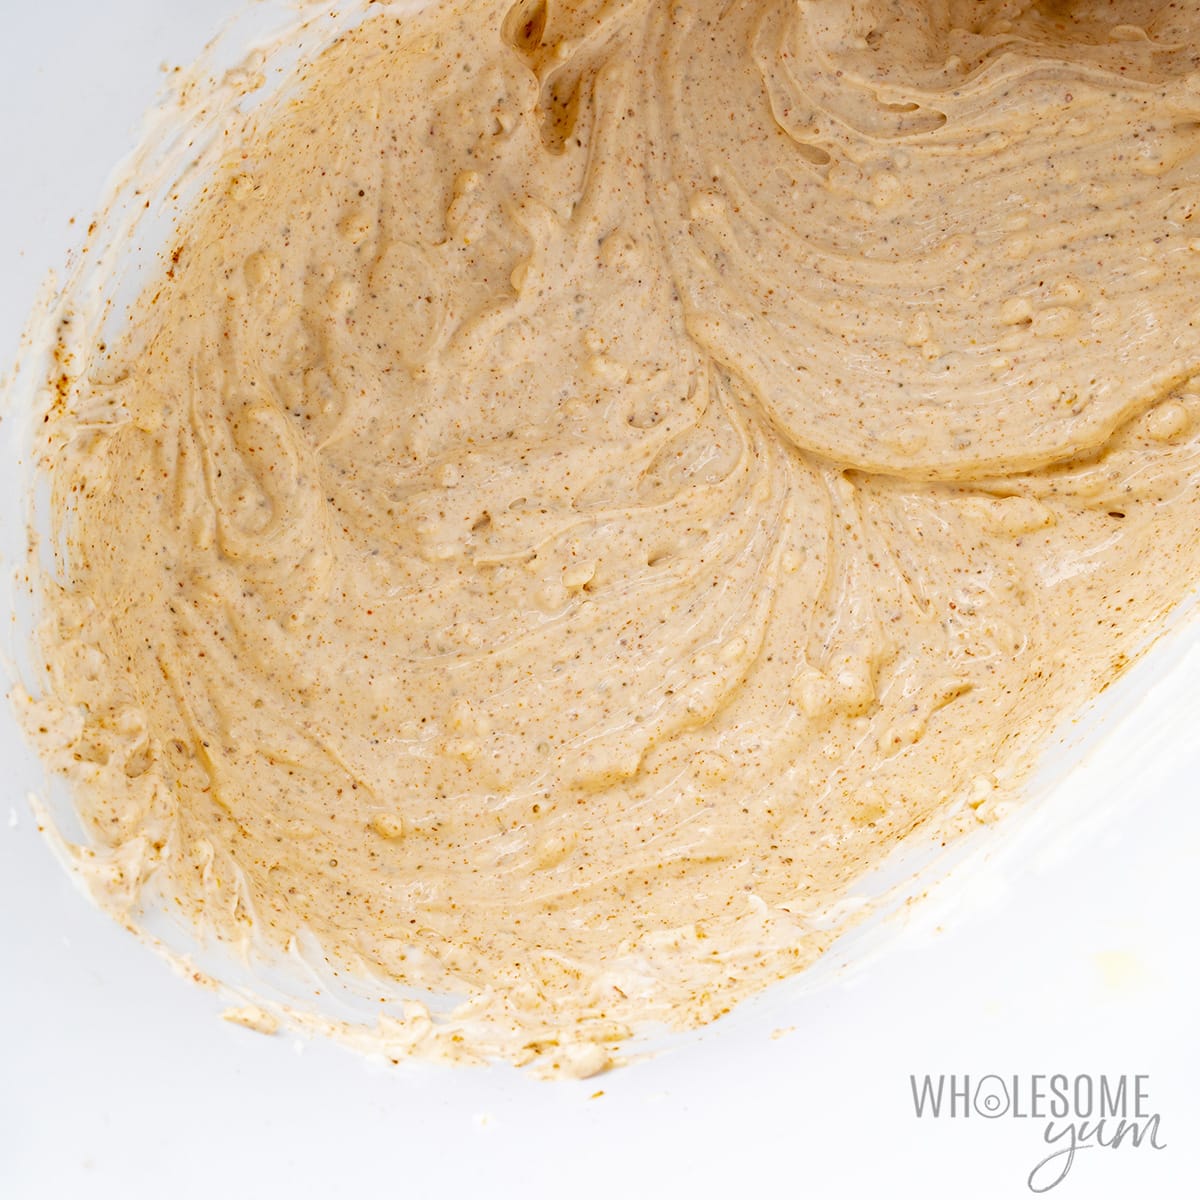 Whisk together the sour cream and cream cheese mixture.